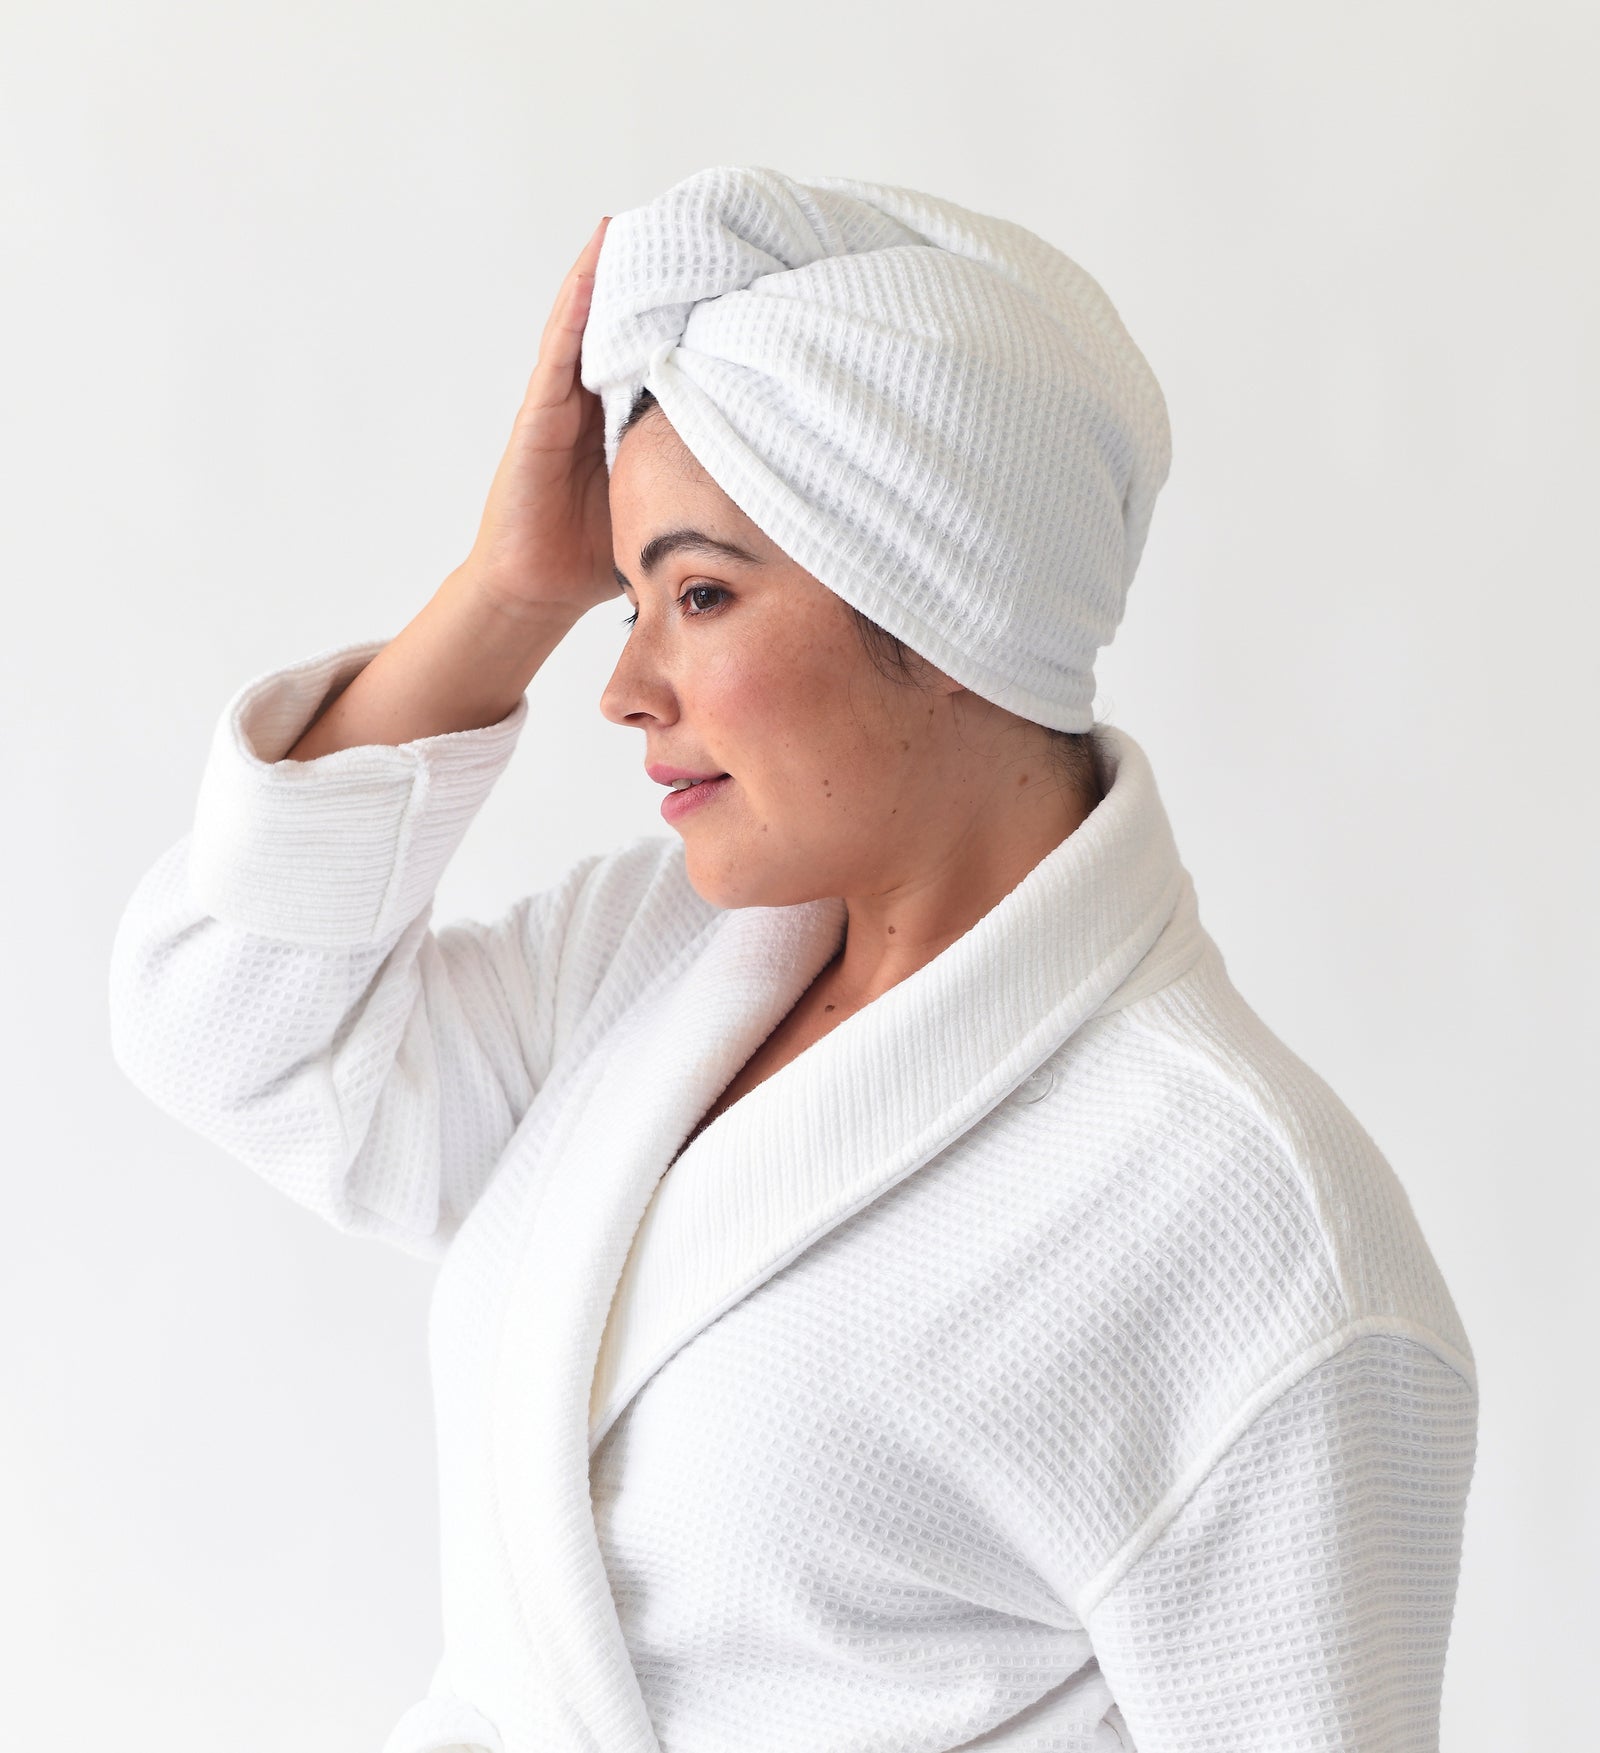 White Waffle Hair Towel. The hair towel is shown being worn by a woman. The photo was taken with a white background 